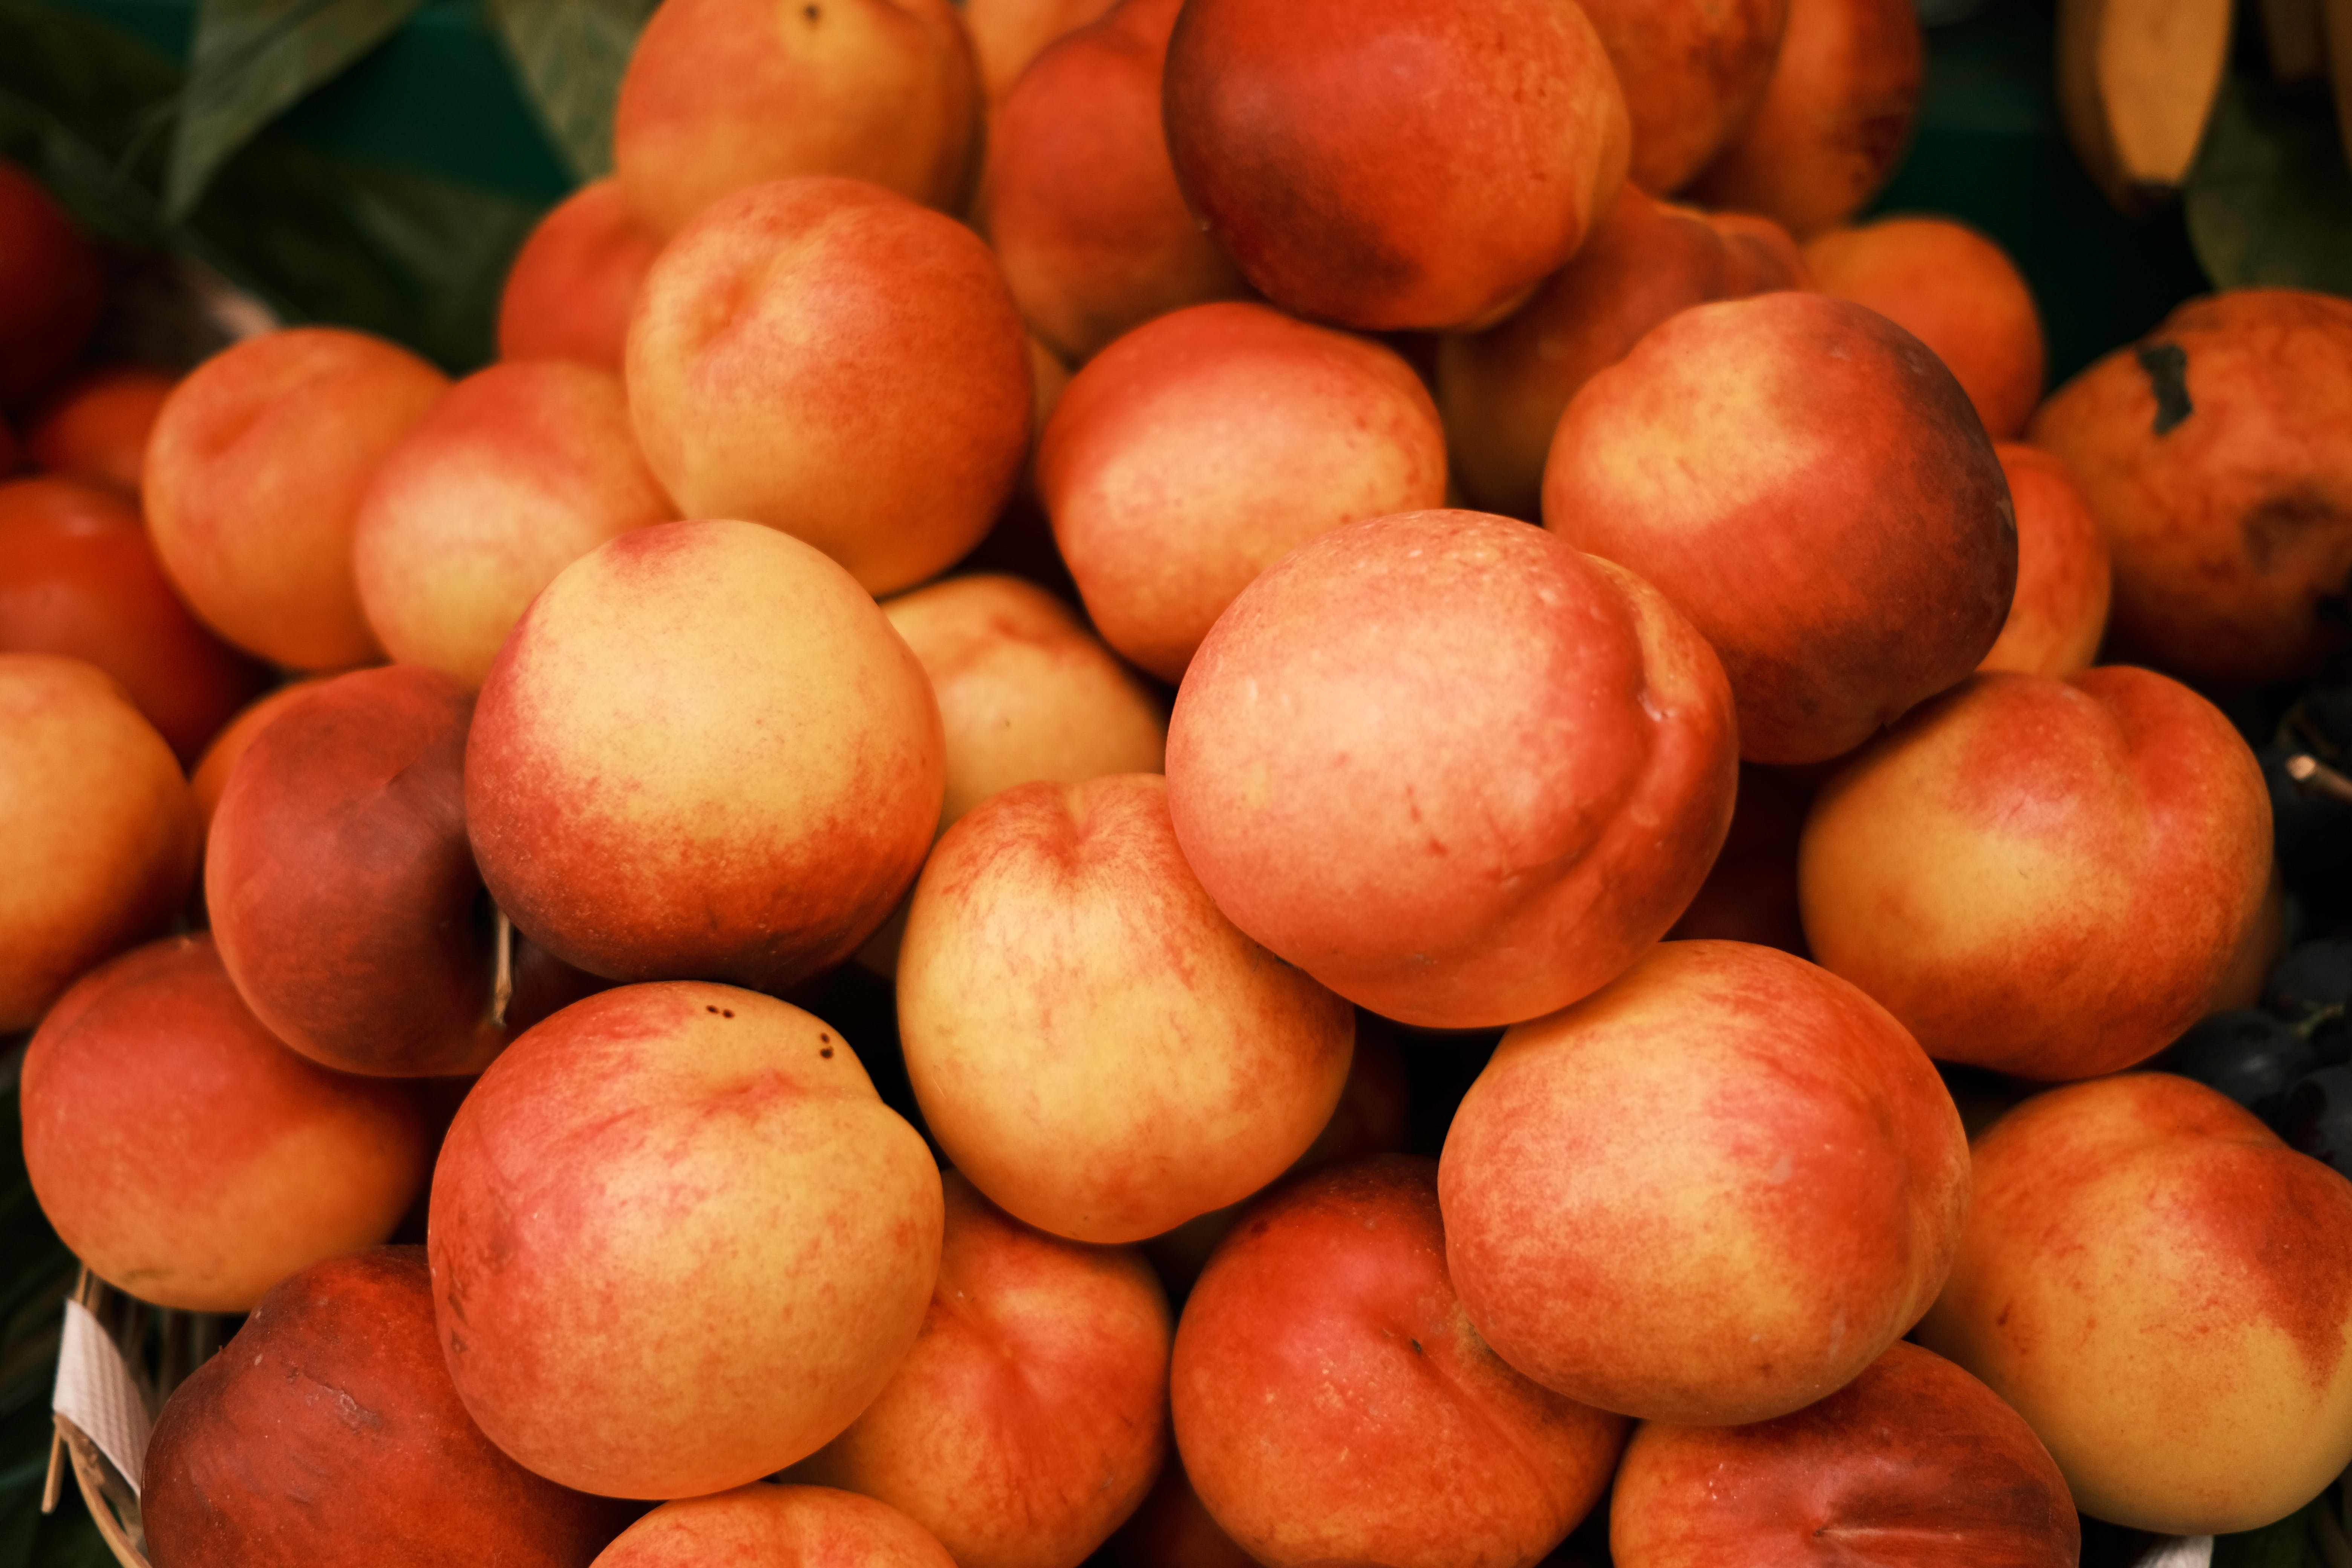 What Are The Benefits of Eating Peach? : A Delicious Summer Fruit